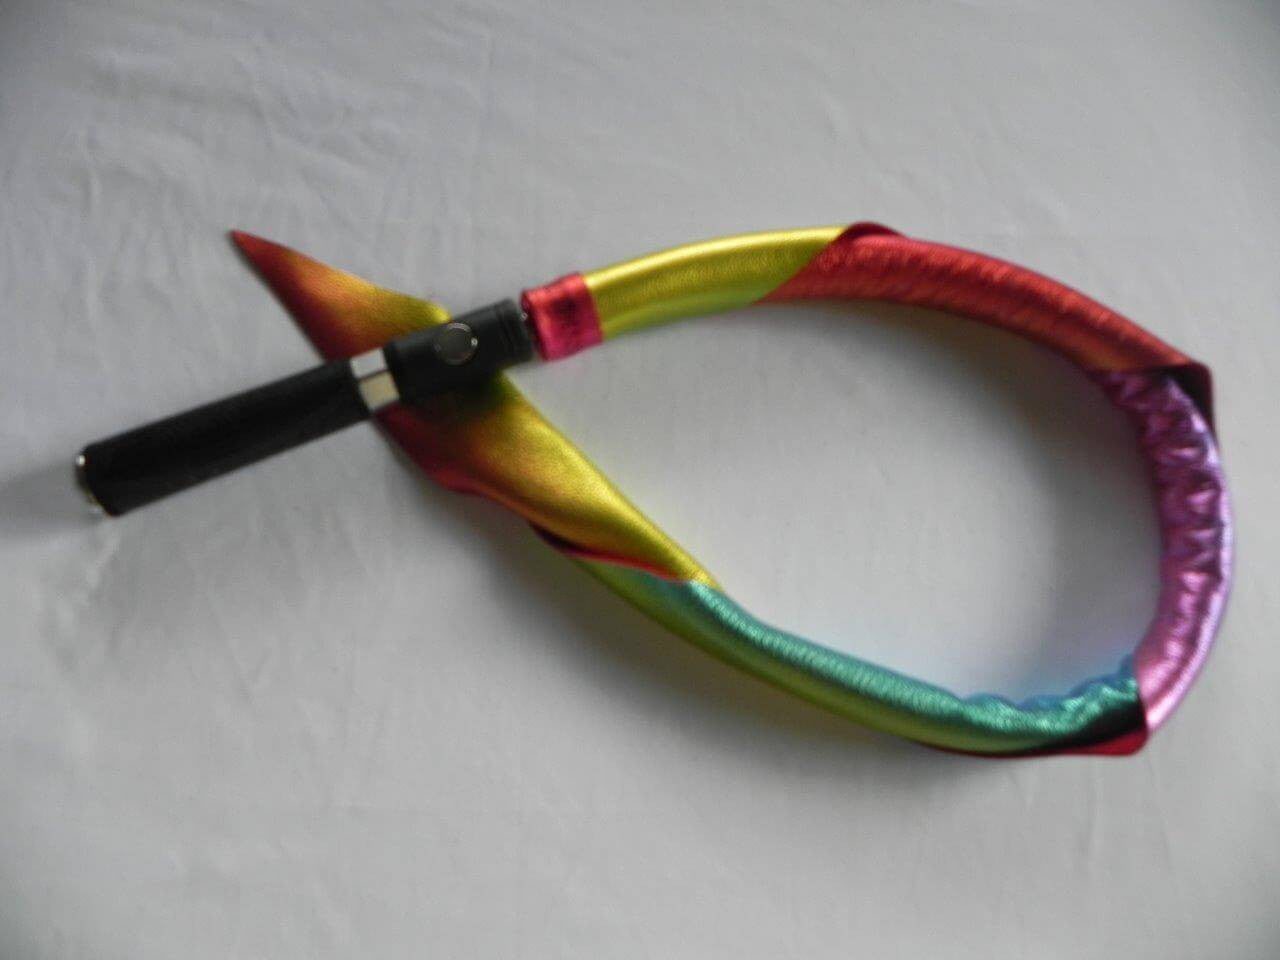 The metallic rainbow Unique Kink Dragon Tail Head with handle attached.